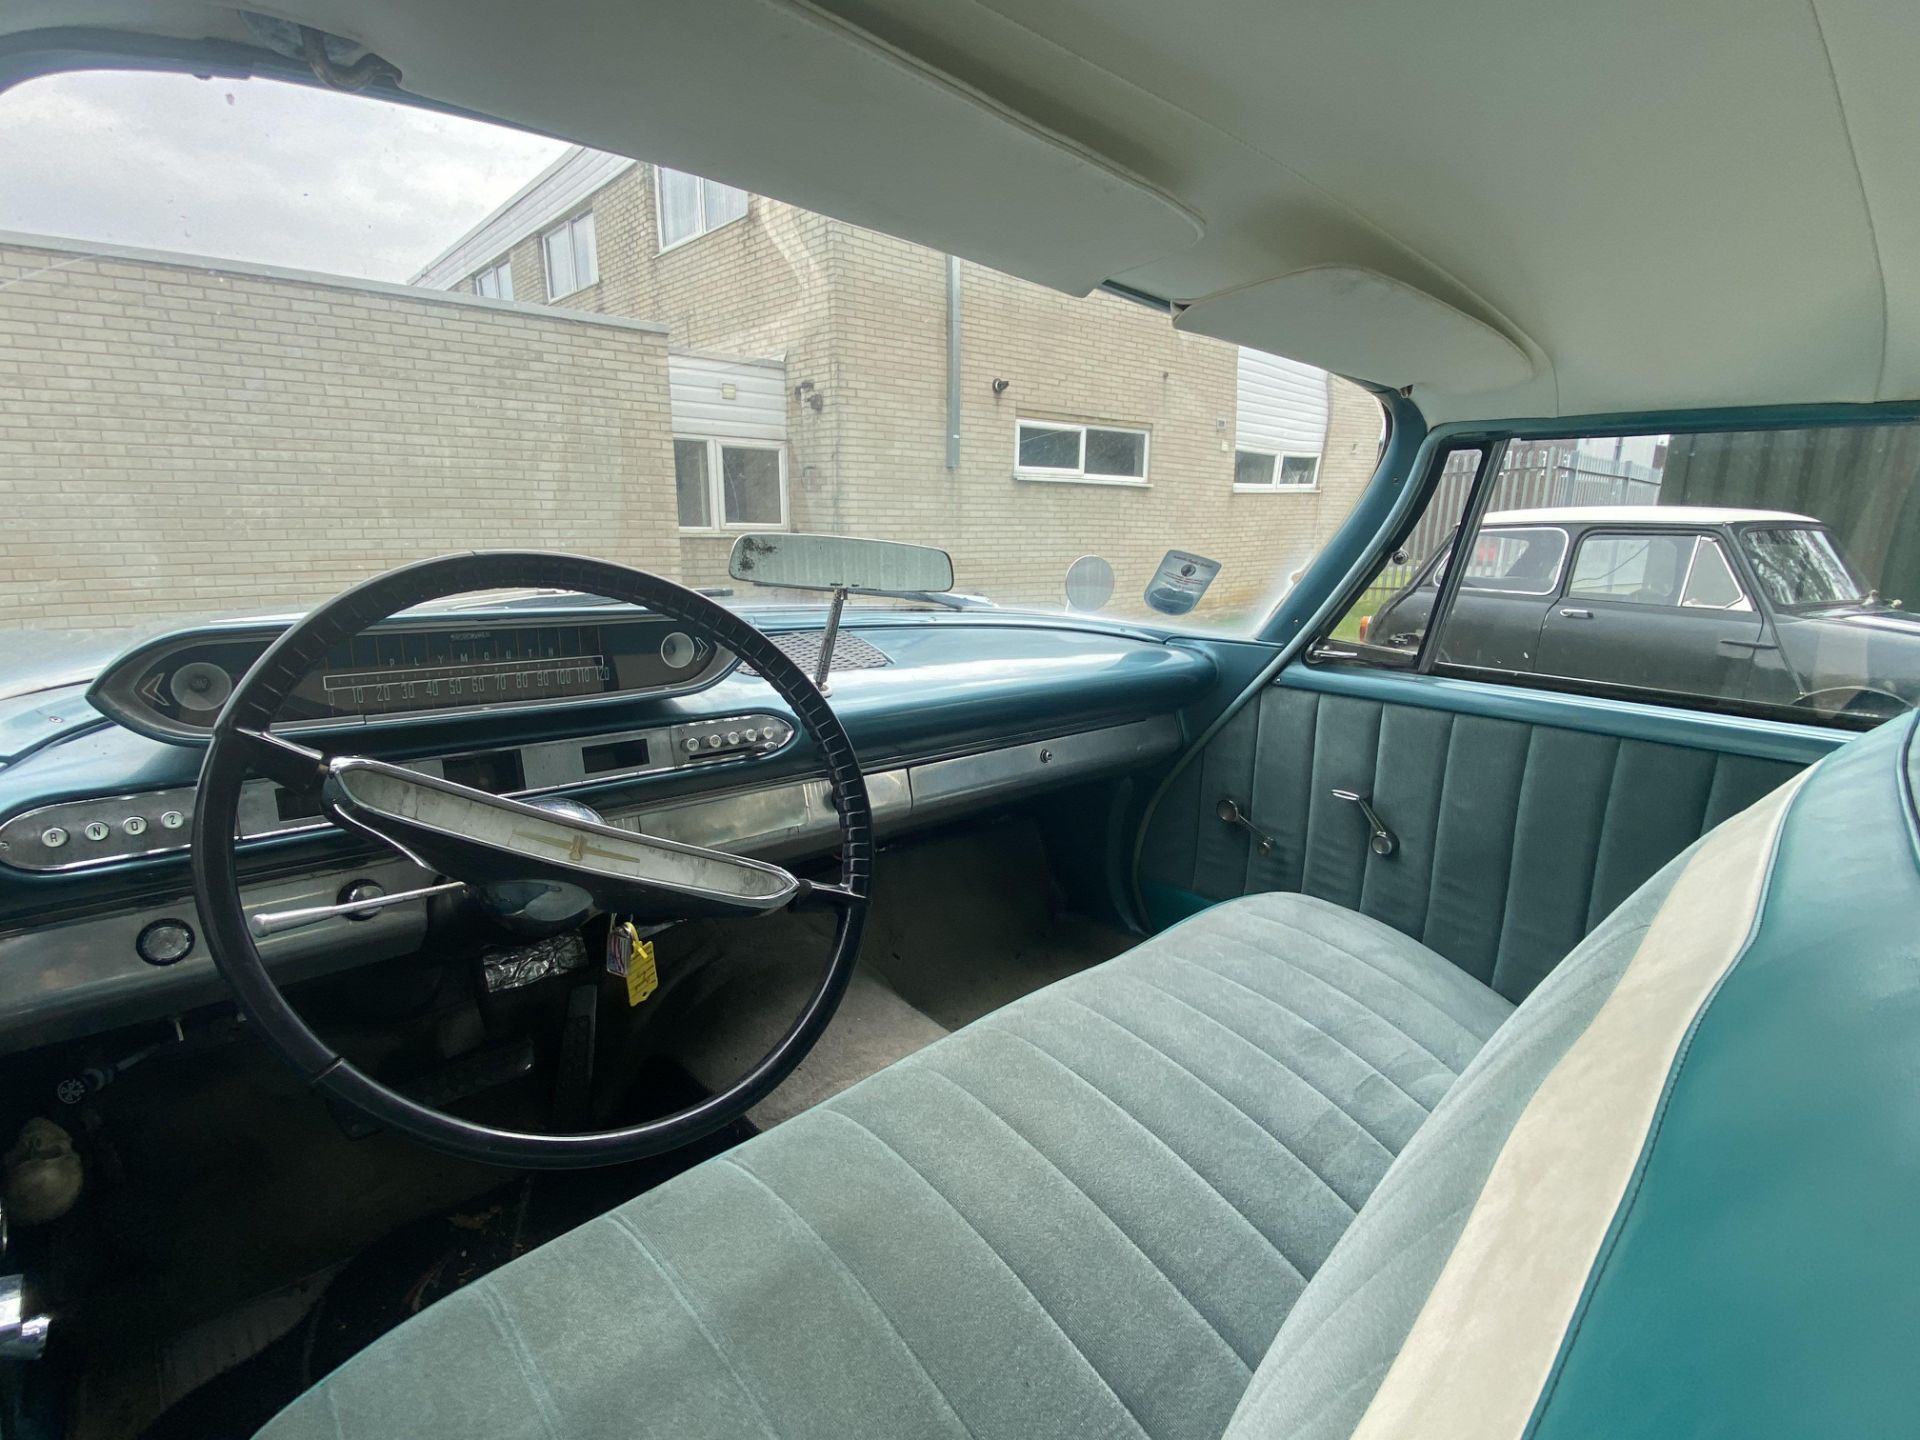 Plymouth Fury - Image 33 of 41